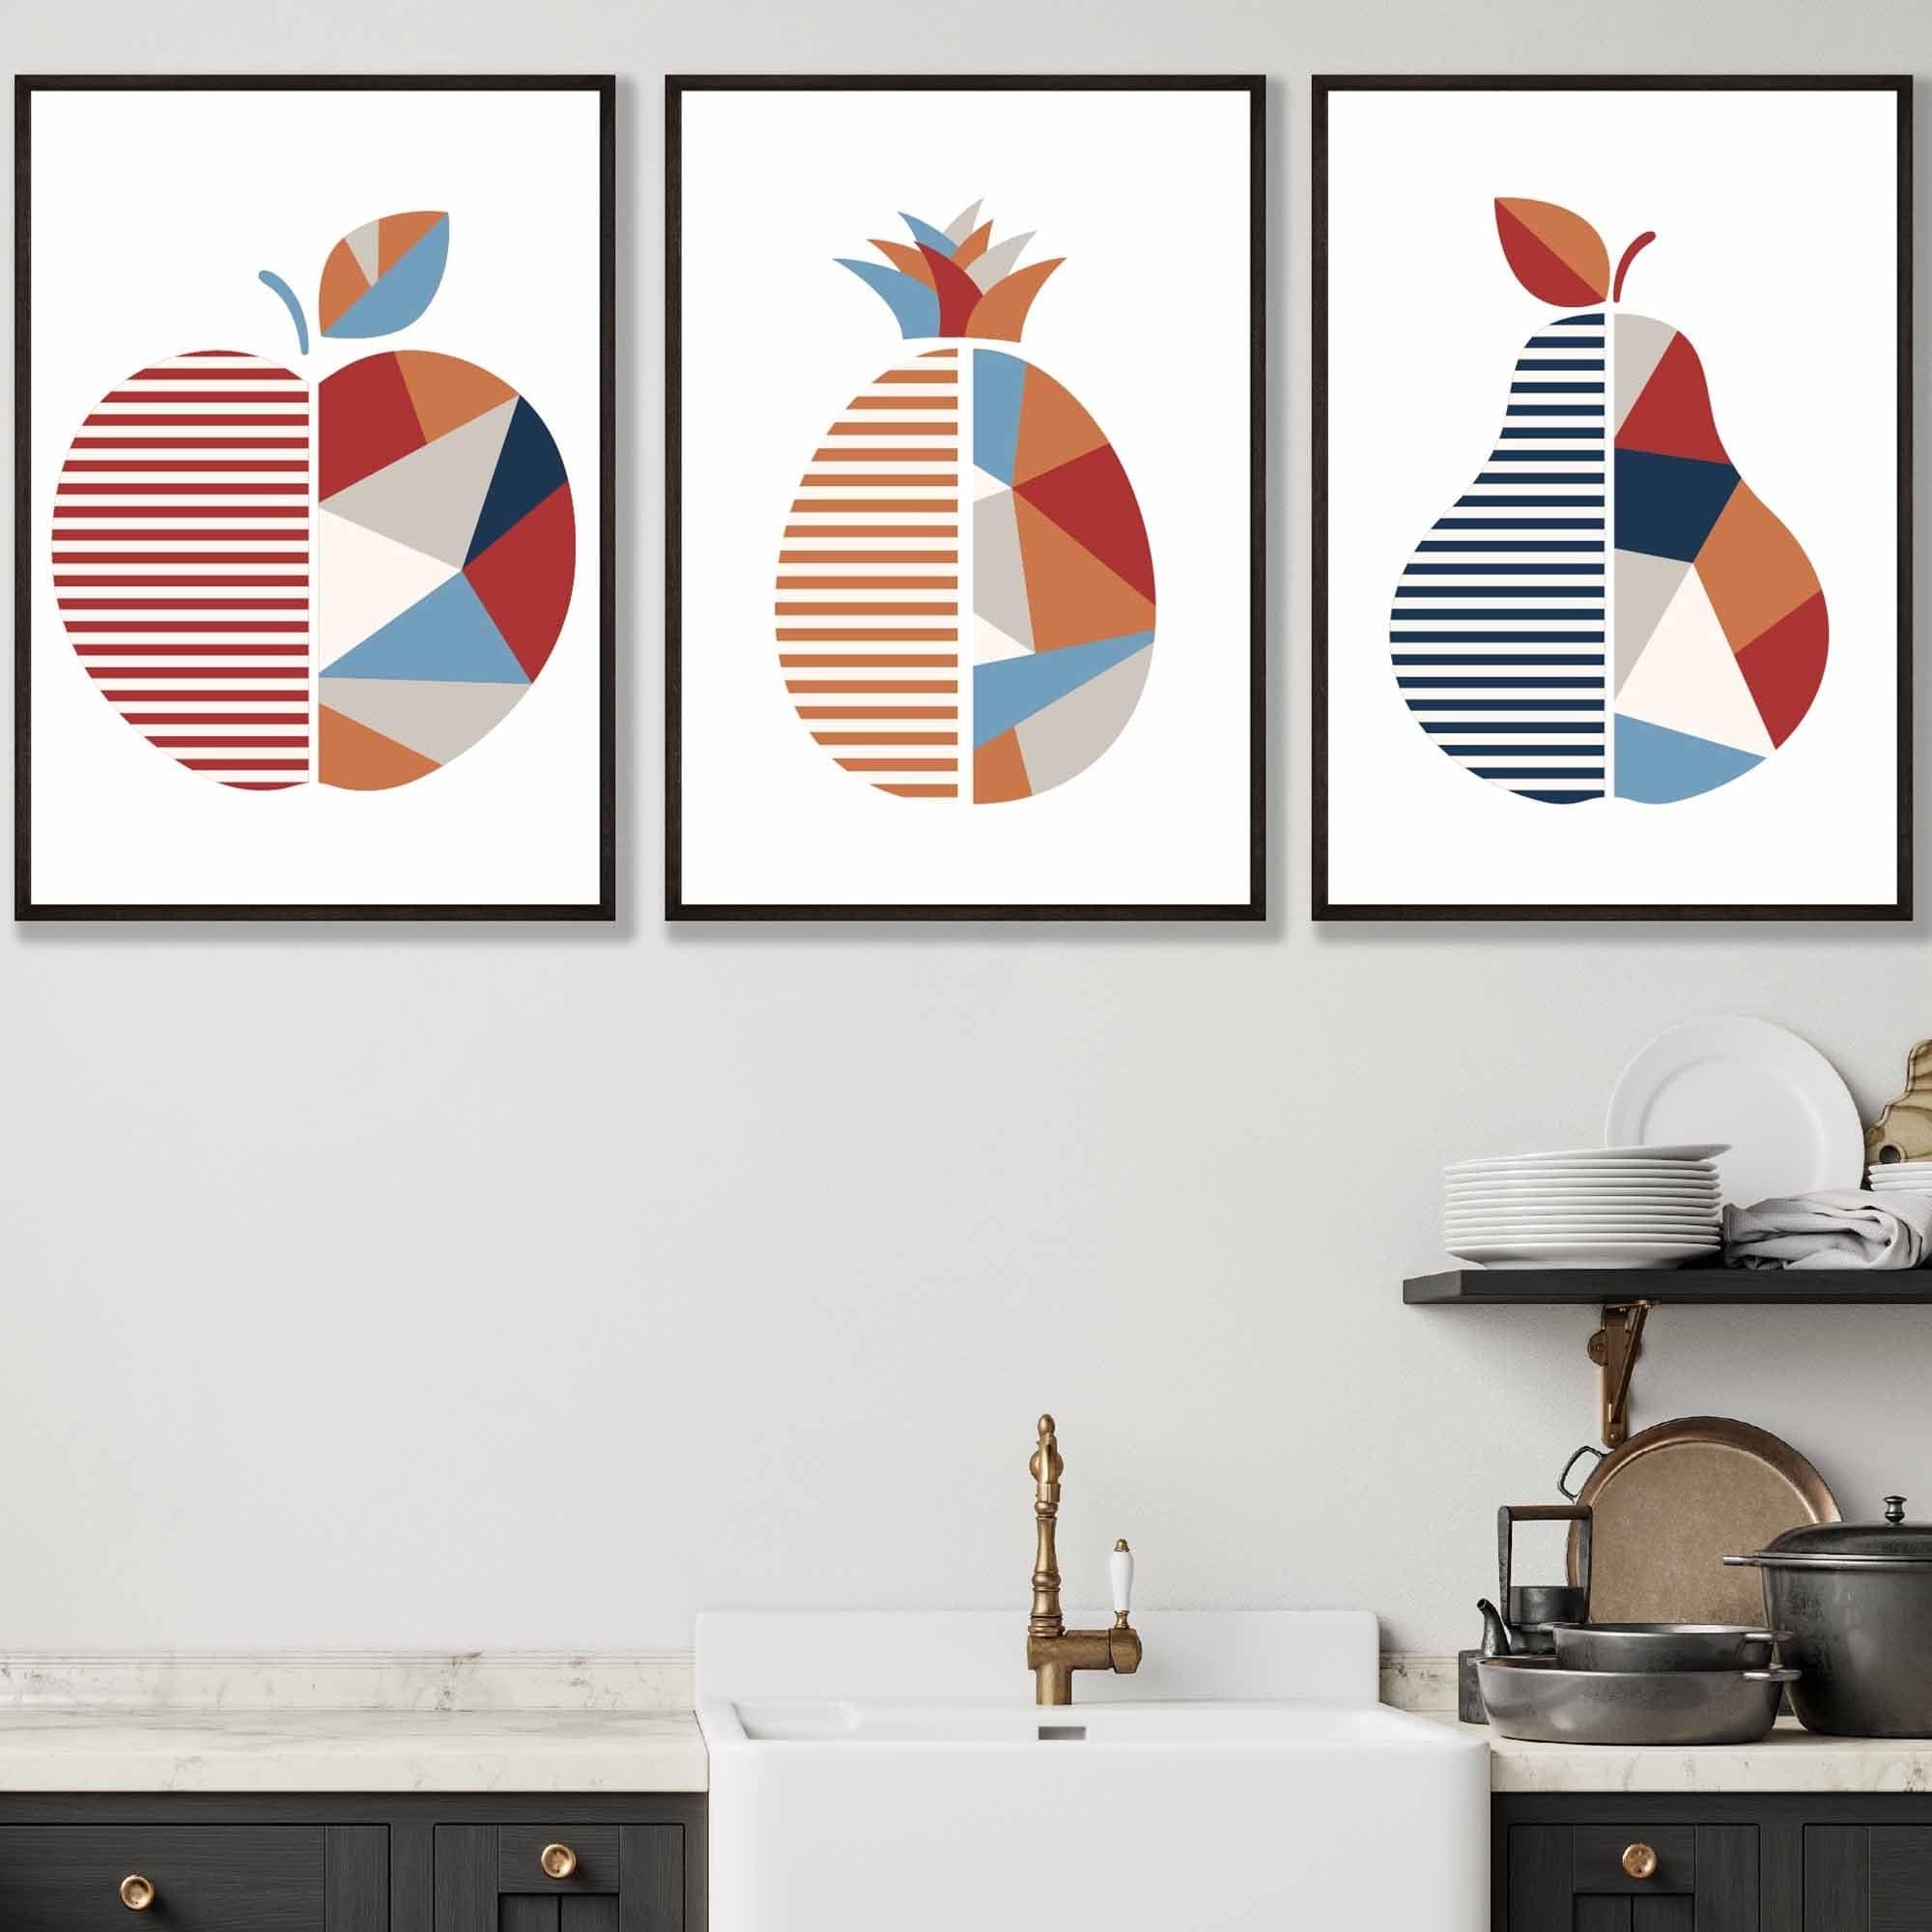 Set of 3 FRAMED Geometric Apple Pineapple Pear Fruit Kitchen Wall Art in Red, Blue and Orange